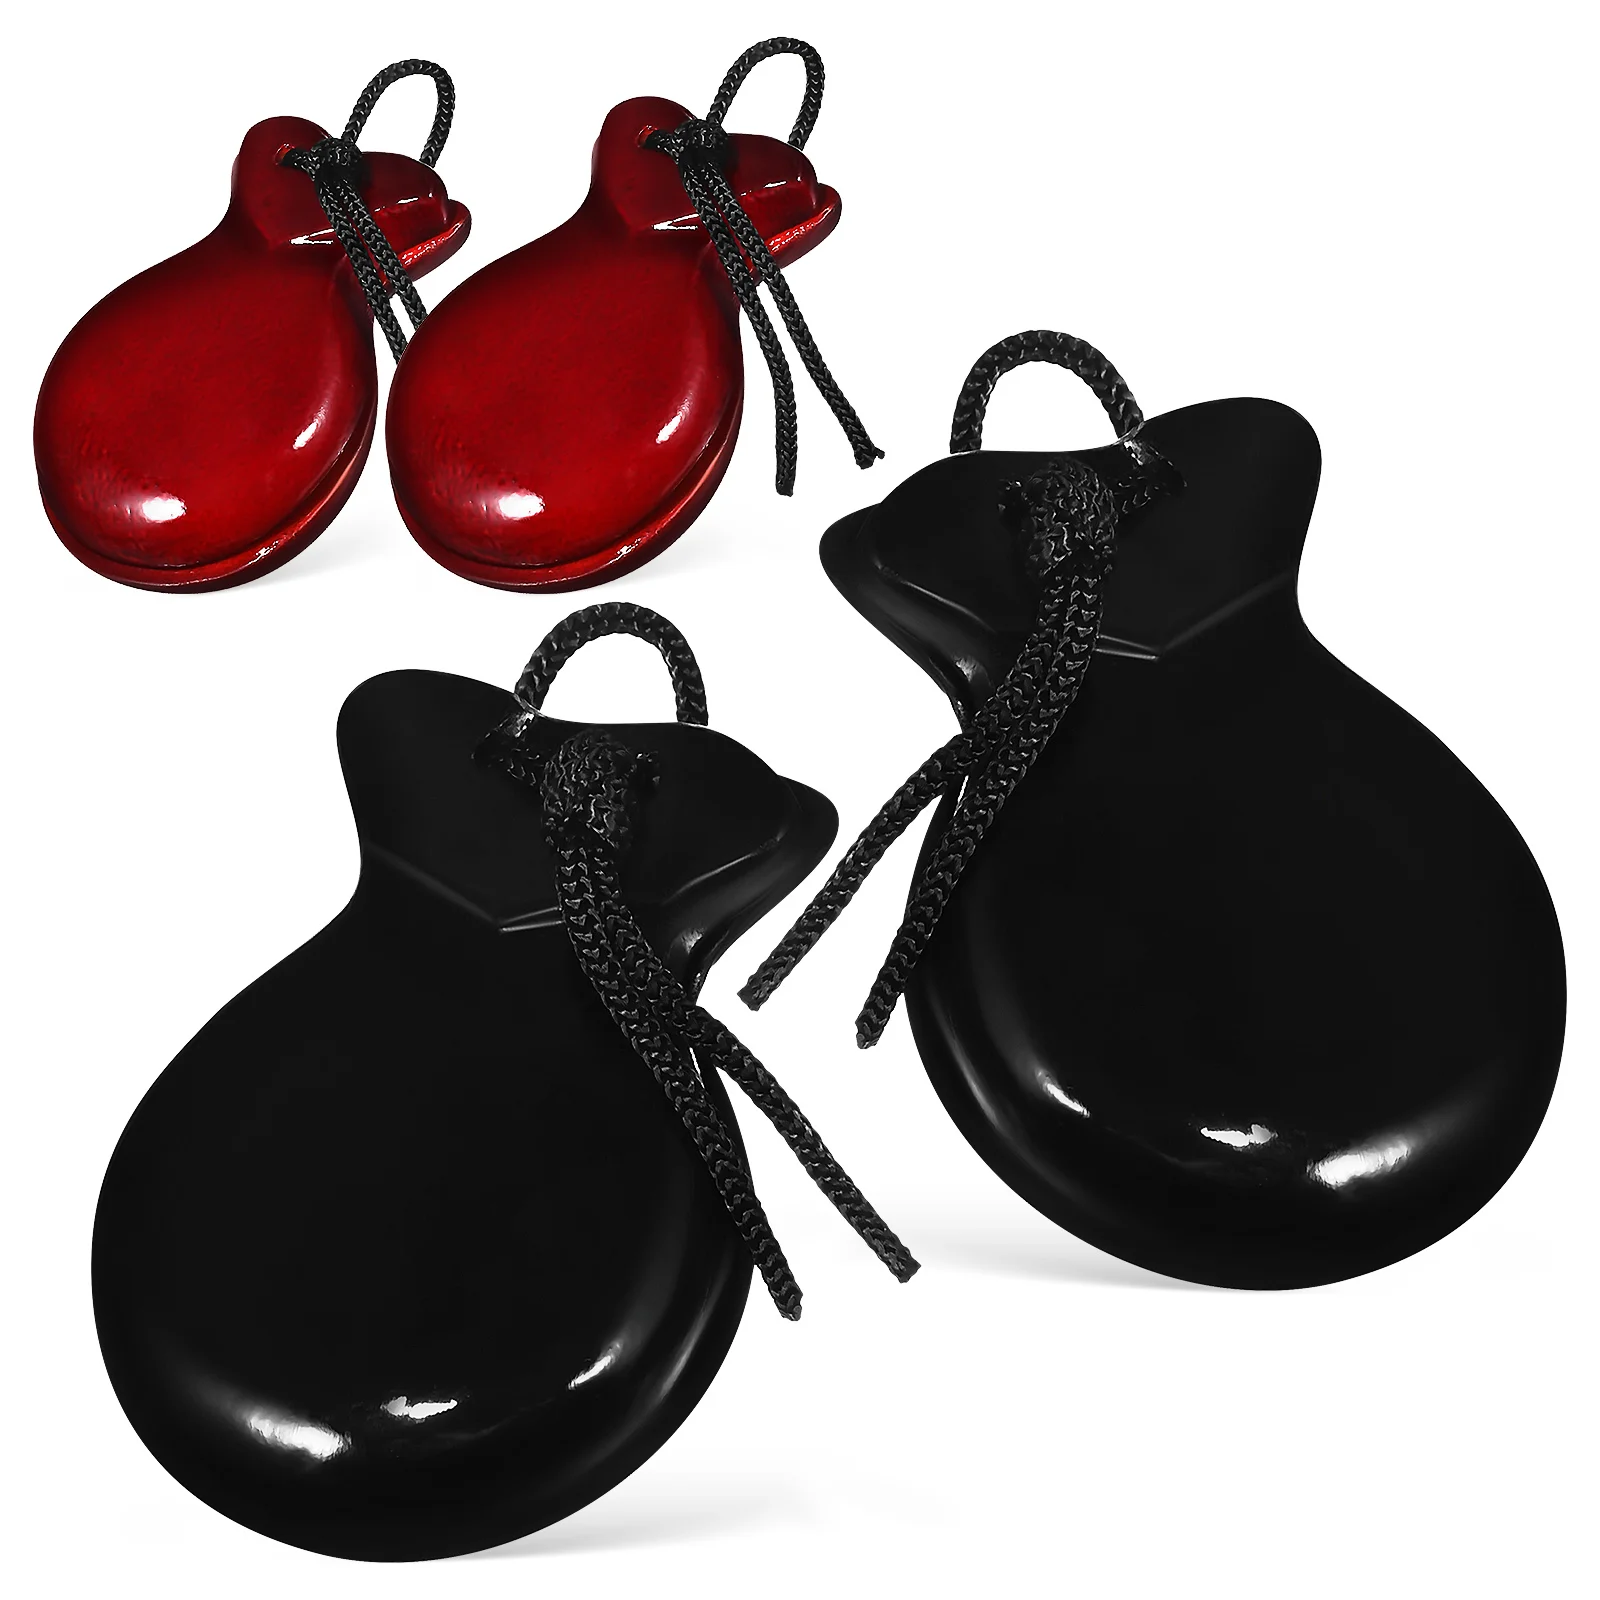 

2 Pairs Music Lovers Small Castanet Wooden Dorinta Handmade Finger Musical Instrument Percussion Castanets The Rehearsals